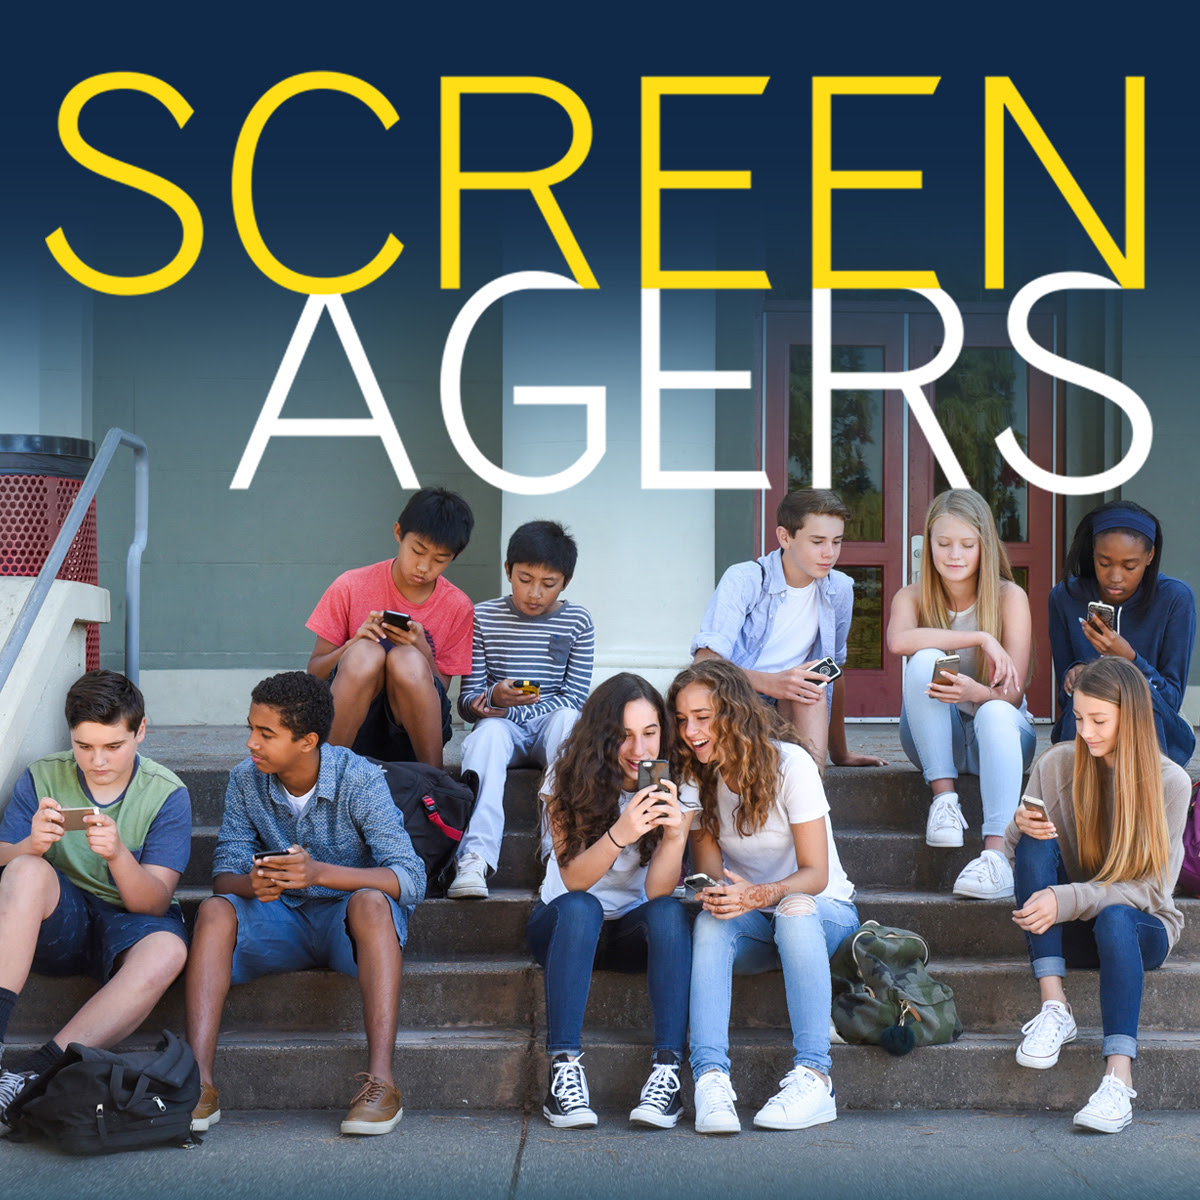 Screenagers Film Presented By Friends of Mark Twain